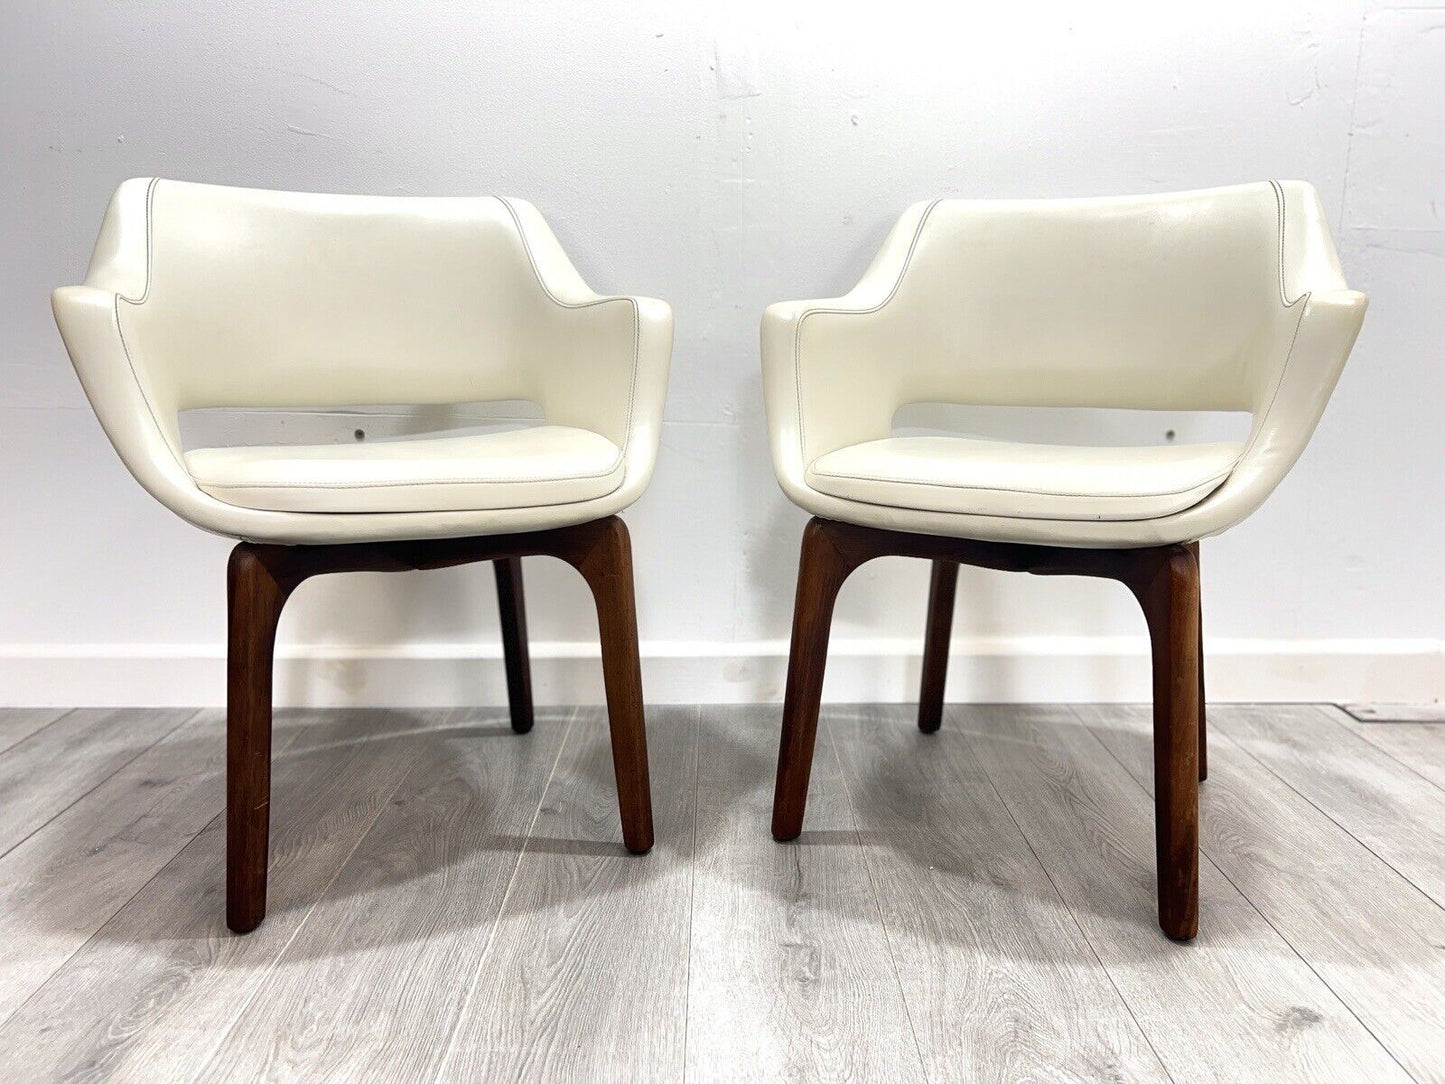 Pair of Danish De Luxe Kilta White Leather and Teak Dining Chairs